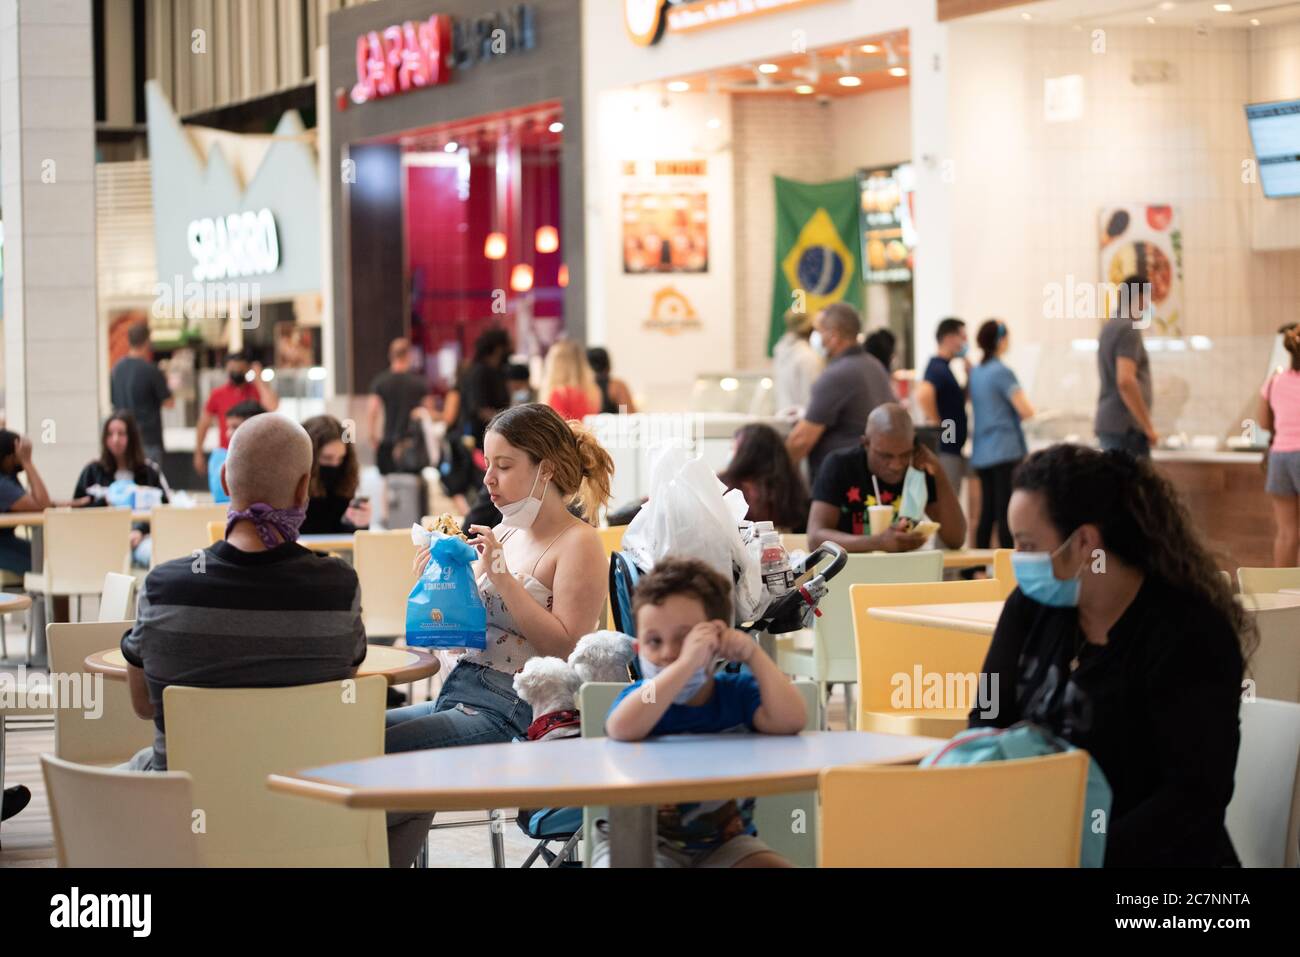 Sunrise, Florida, USA. 18th July, 2020. Shoppers dine at the food court at Sawgrass Mills Mall in Florida despite record high number of new Covid-19 cases in the state this week Credit: Orit Ben-Ezzer/ZUMA Wire/Alamy Live News Stock Photo